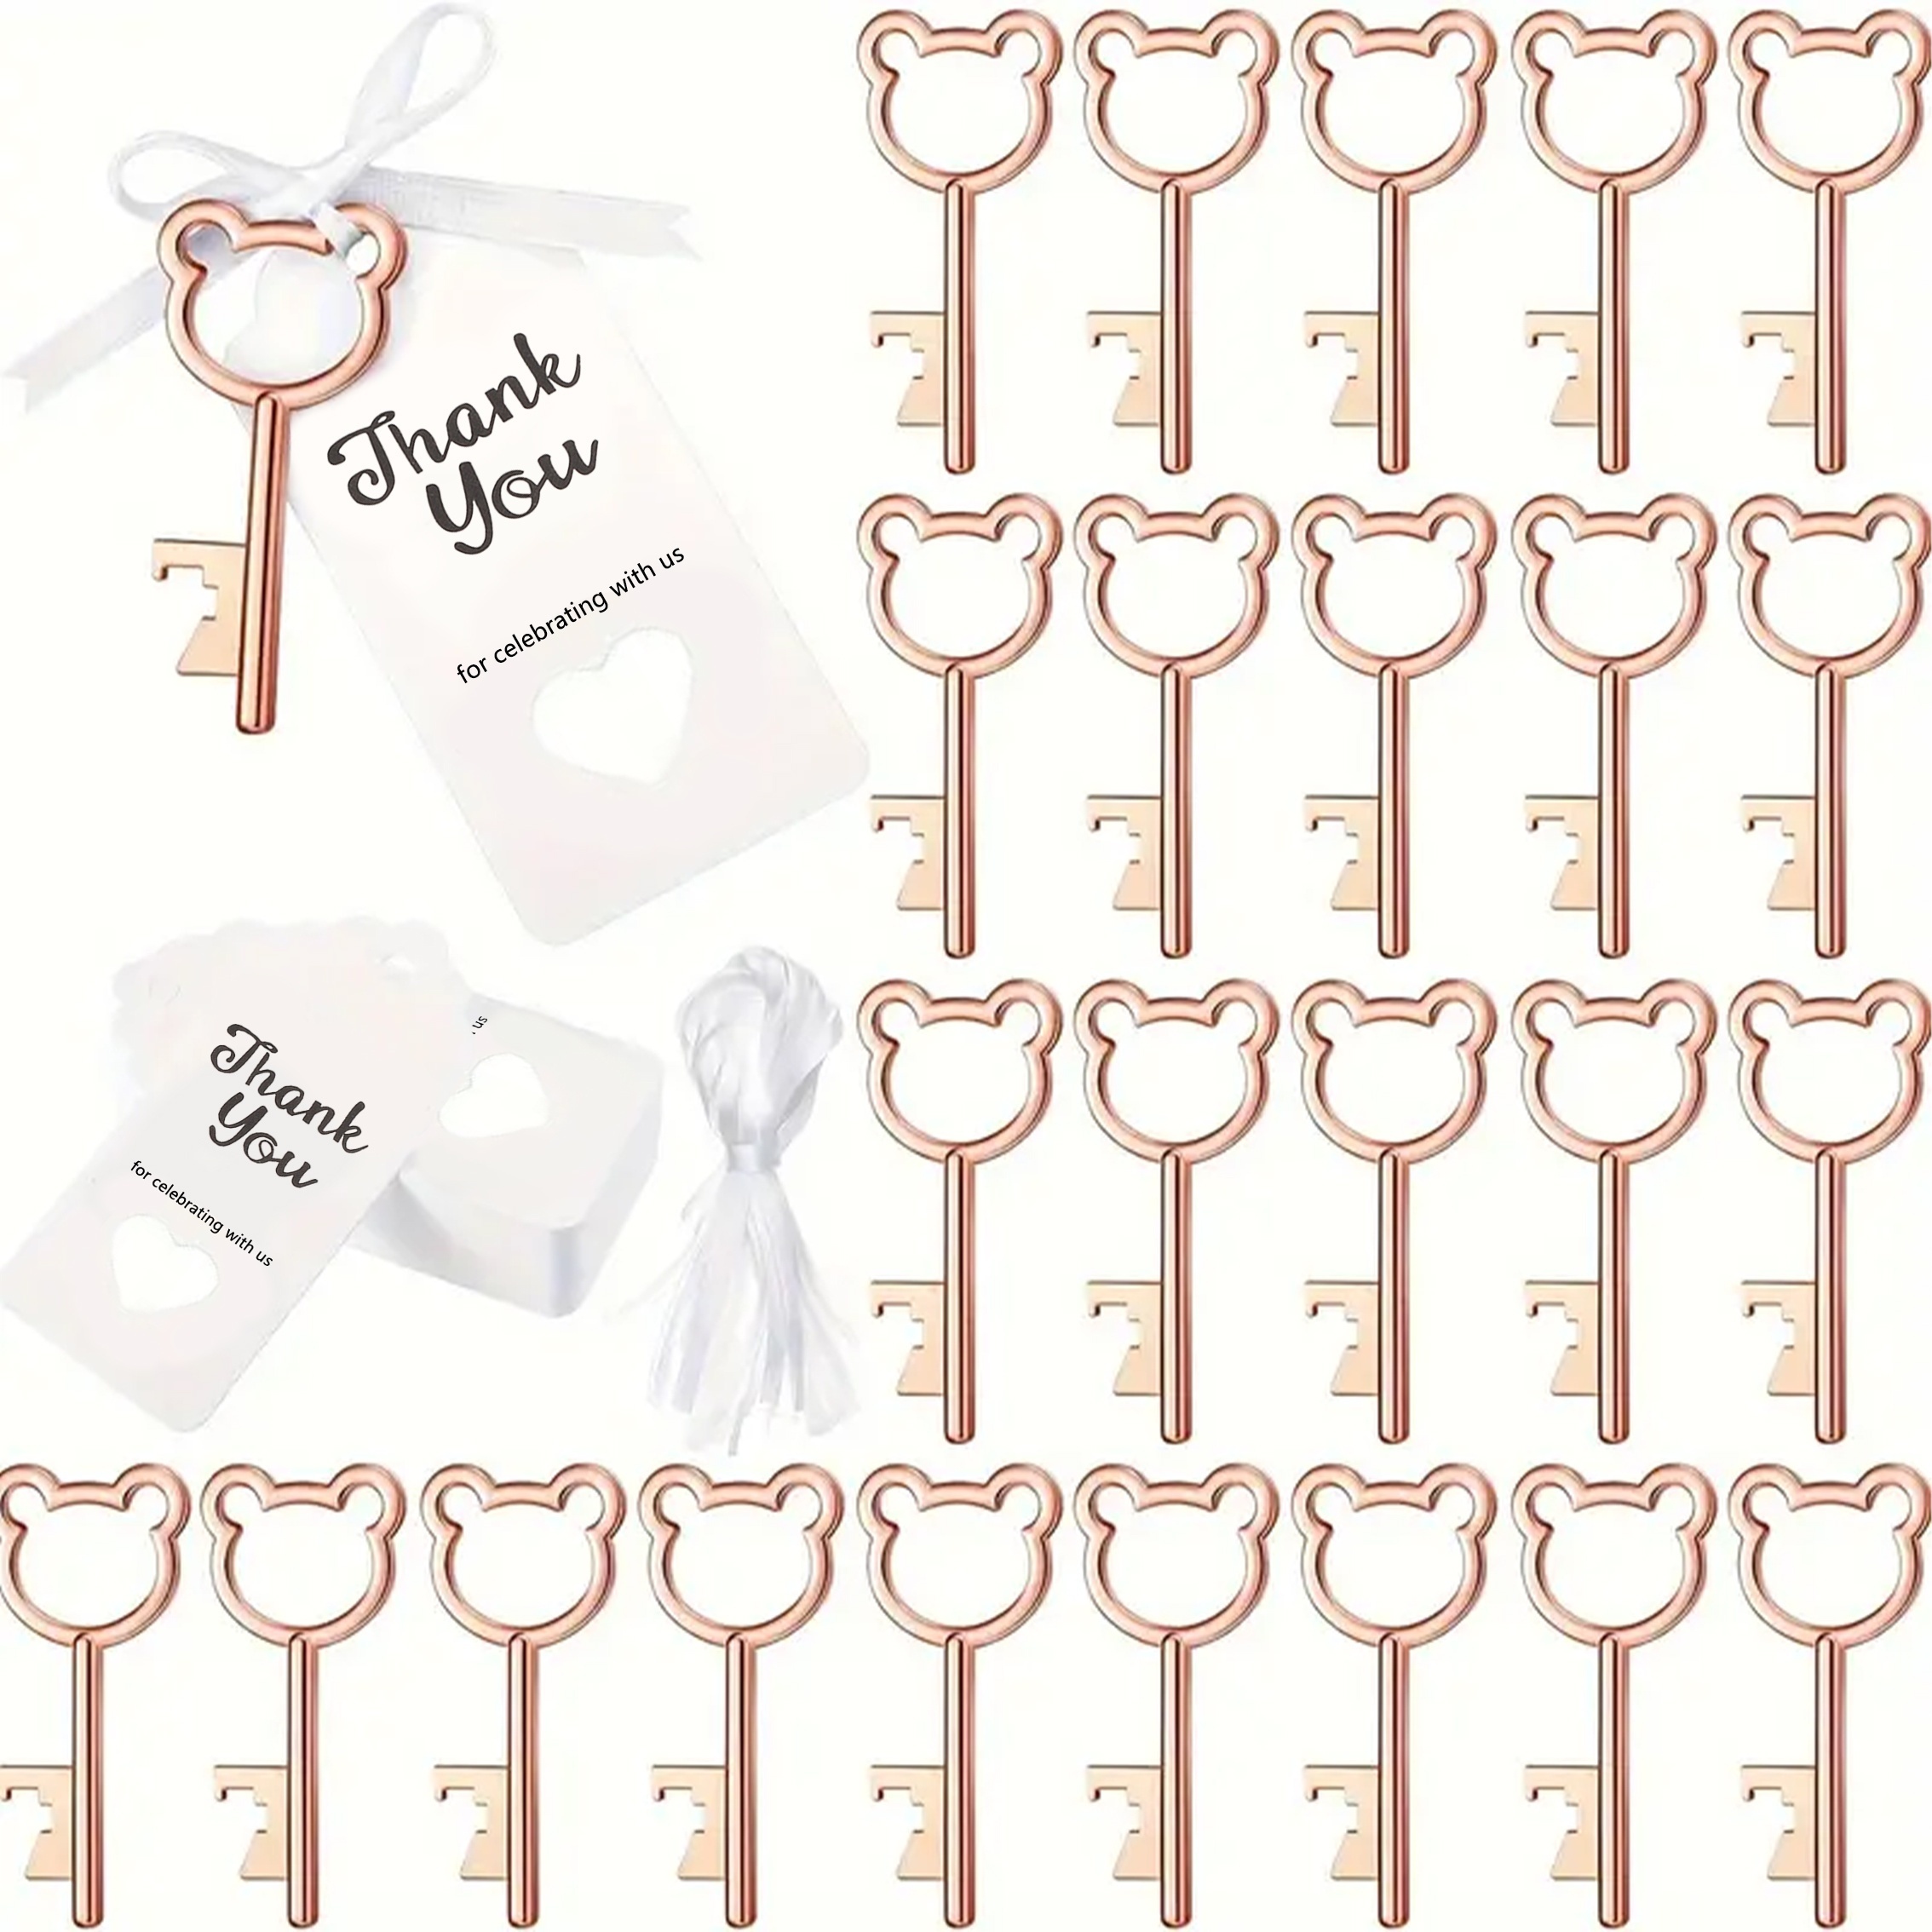 

30pcs Bear Key Bottle Opener Wedding Favors With Thank You Tags And Ribbons - Universal Holiday Gifts, Non-electric, Featherless, General Use, Durable Other Material